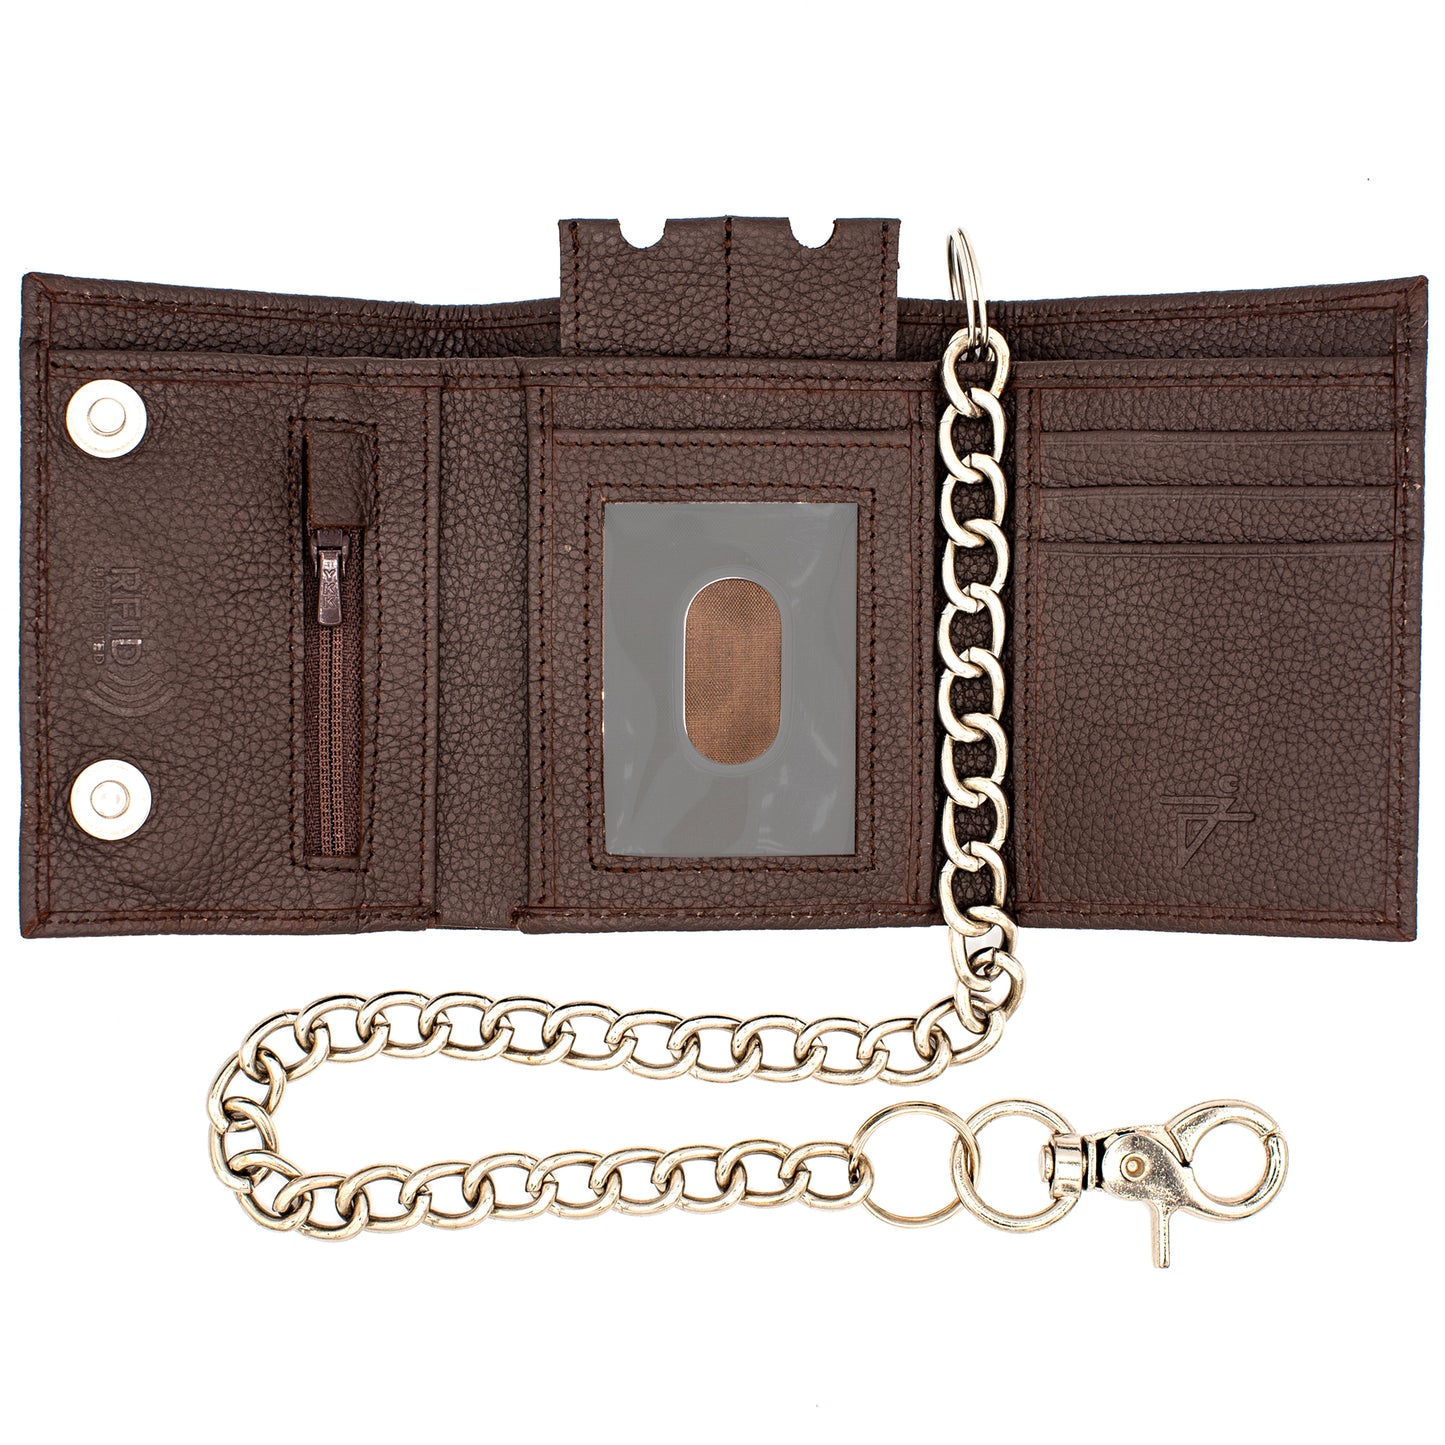 Trifold Chain Wallet with Snaps RFID Leather Wallet